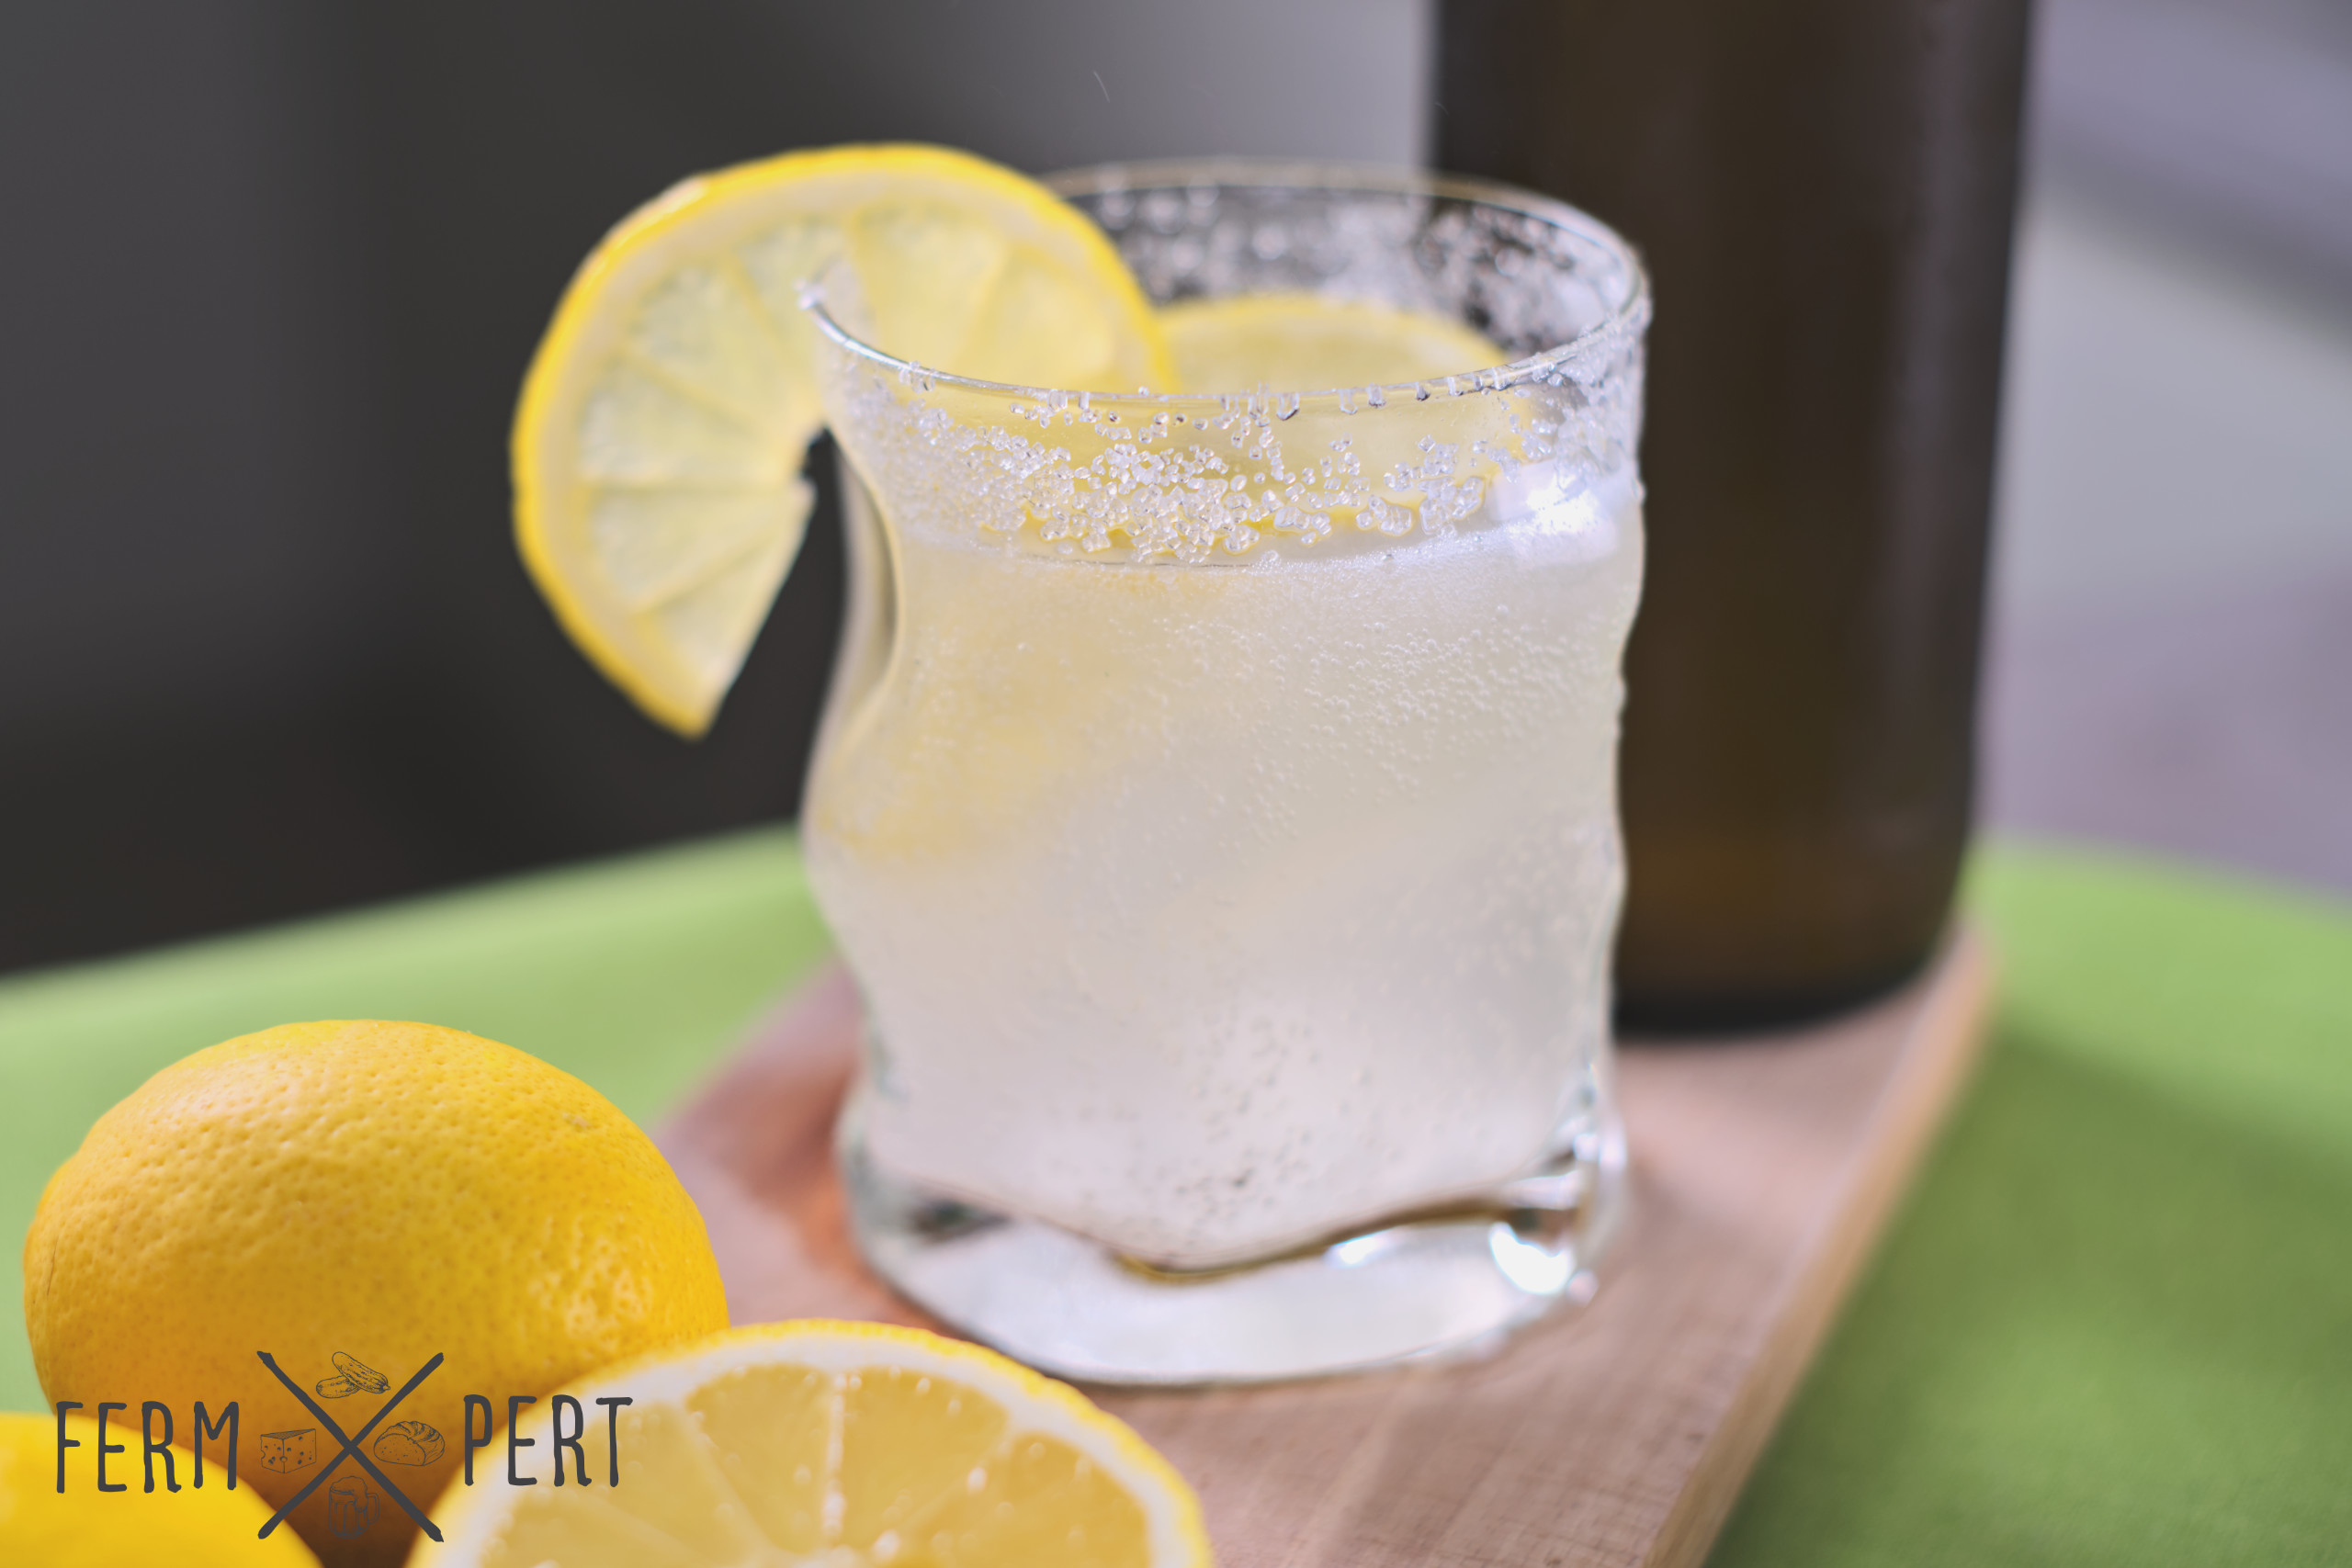 Photo of a glass of lemonade with lemons in front of it and a brown bottle behind.